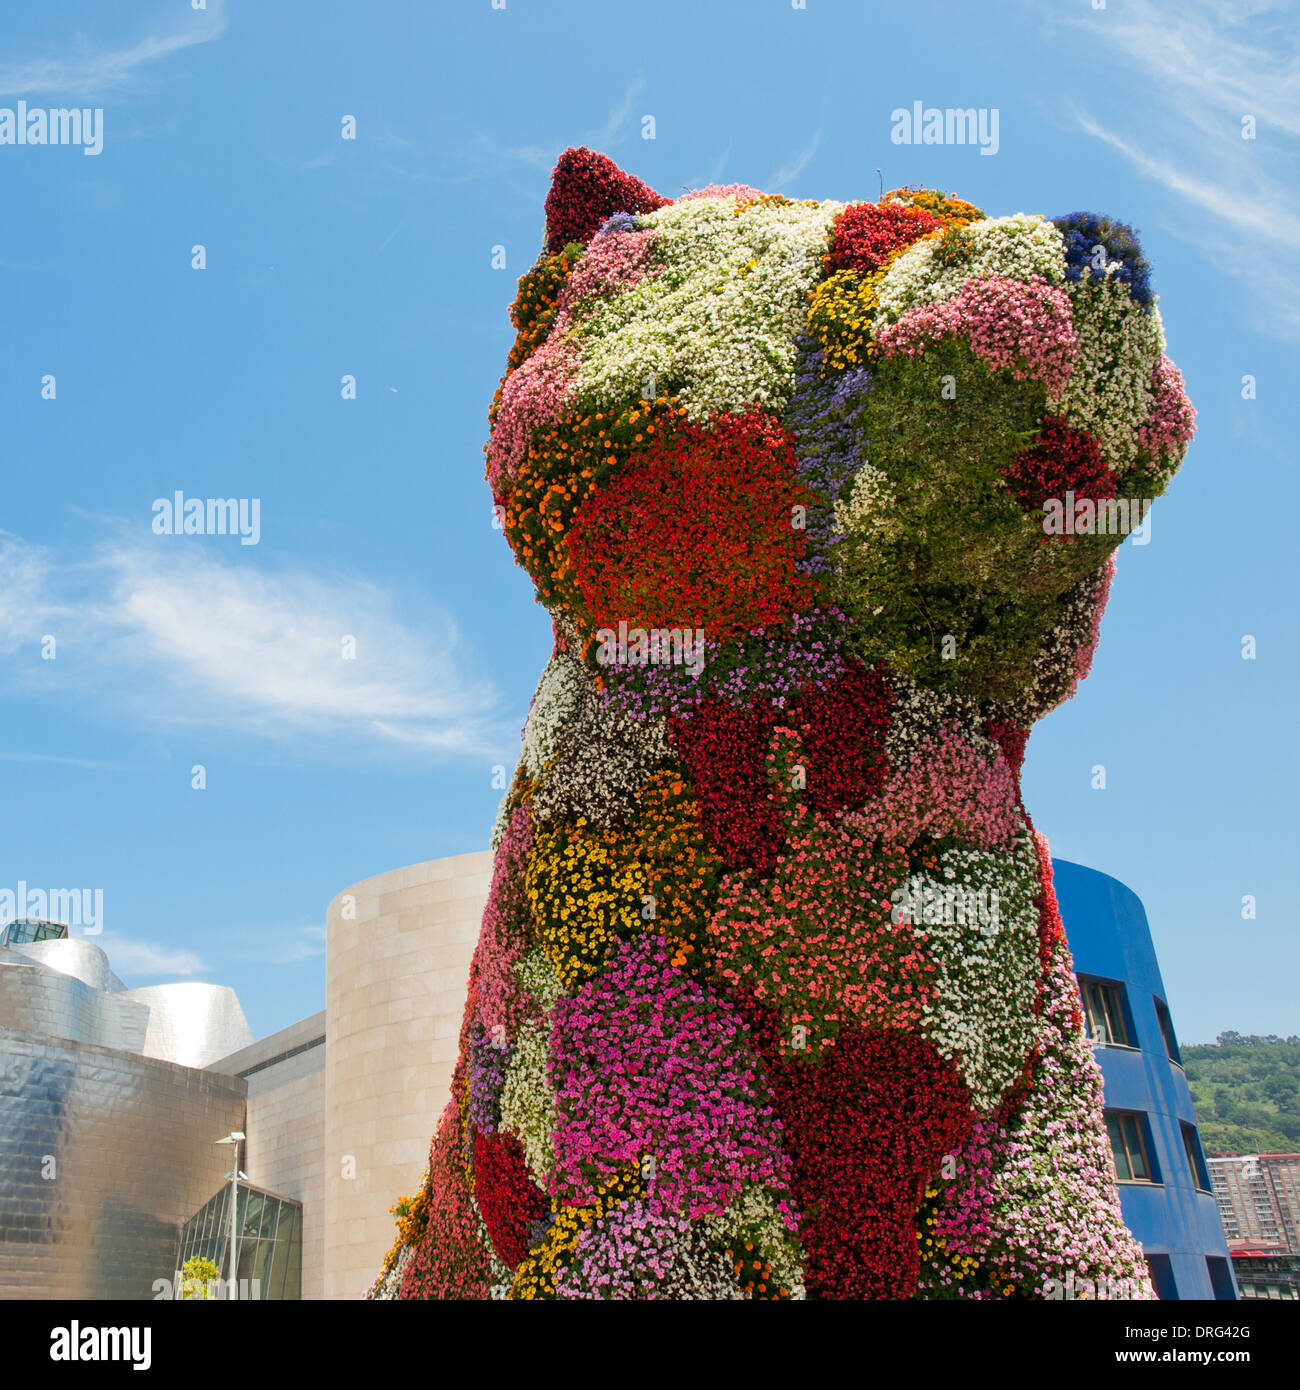 A view of 'Puppy', a floral sculpture by American artist Jeff Koons, in front of the Guggenheim Museum Bilbao in Bilbao, Spain. Stock Photo